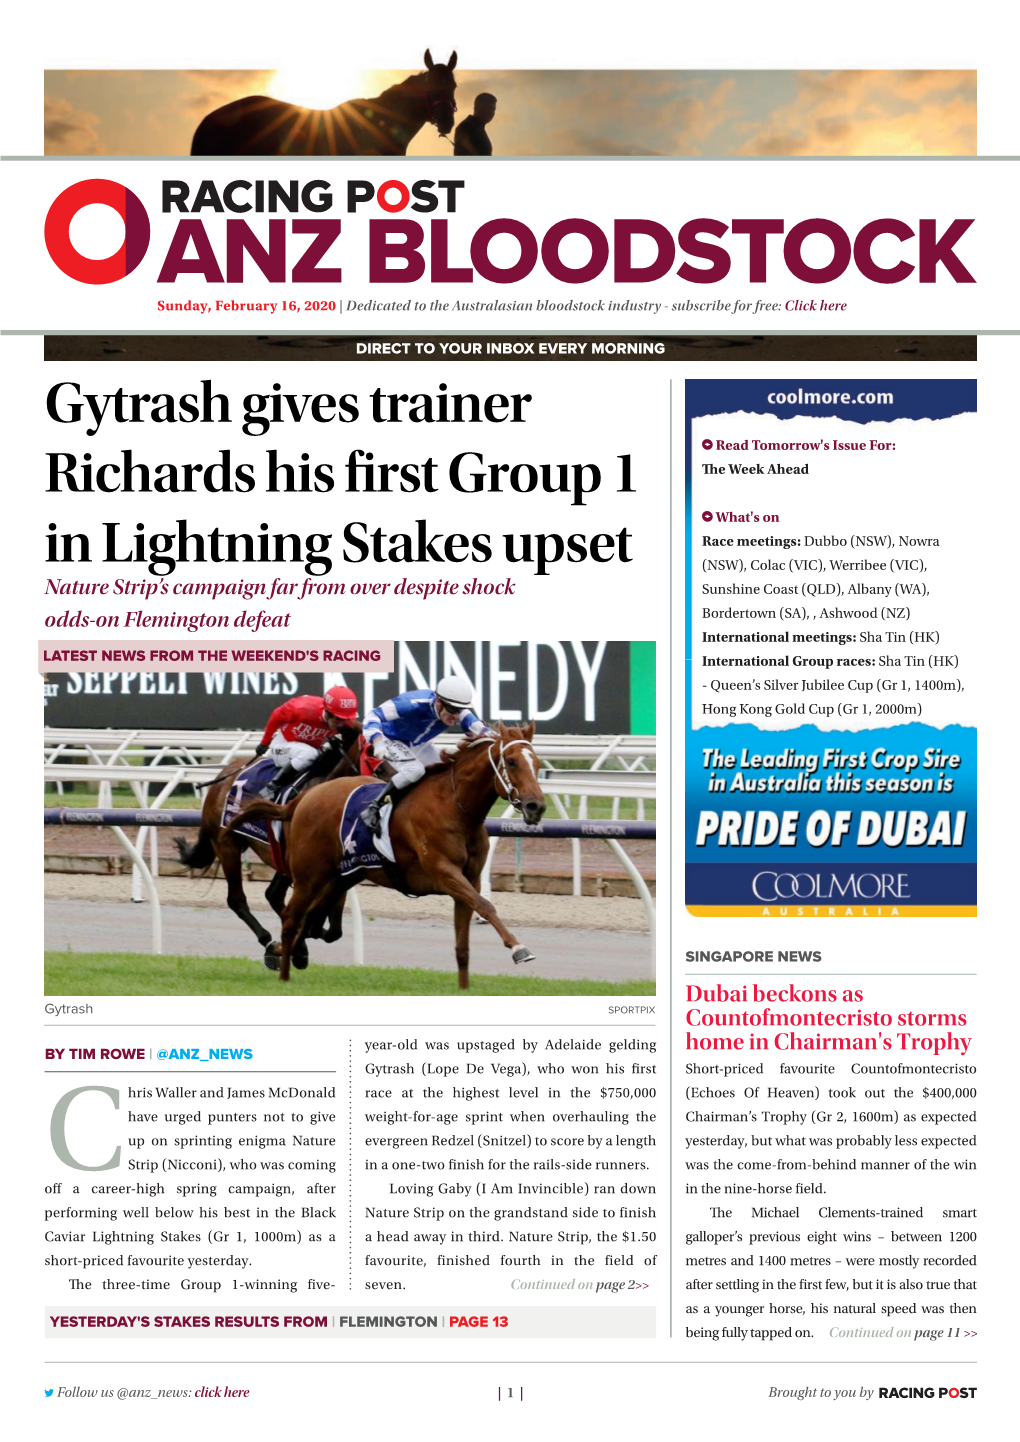 Gytrash Gives Trainer Richards His First Group 1 in Lightning Stakes Upset | 2 | Sunday, February 16, 2020